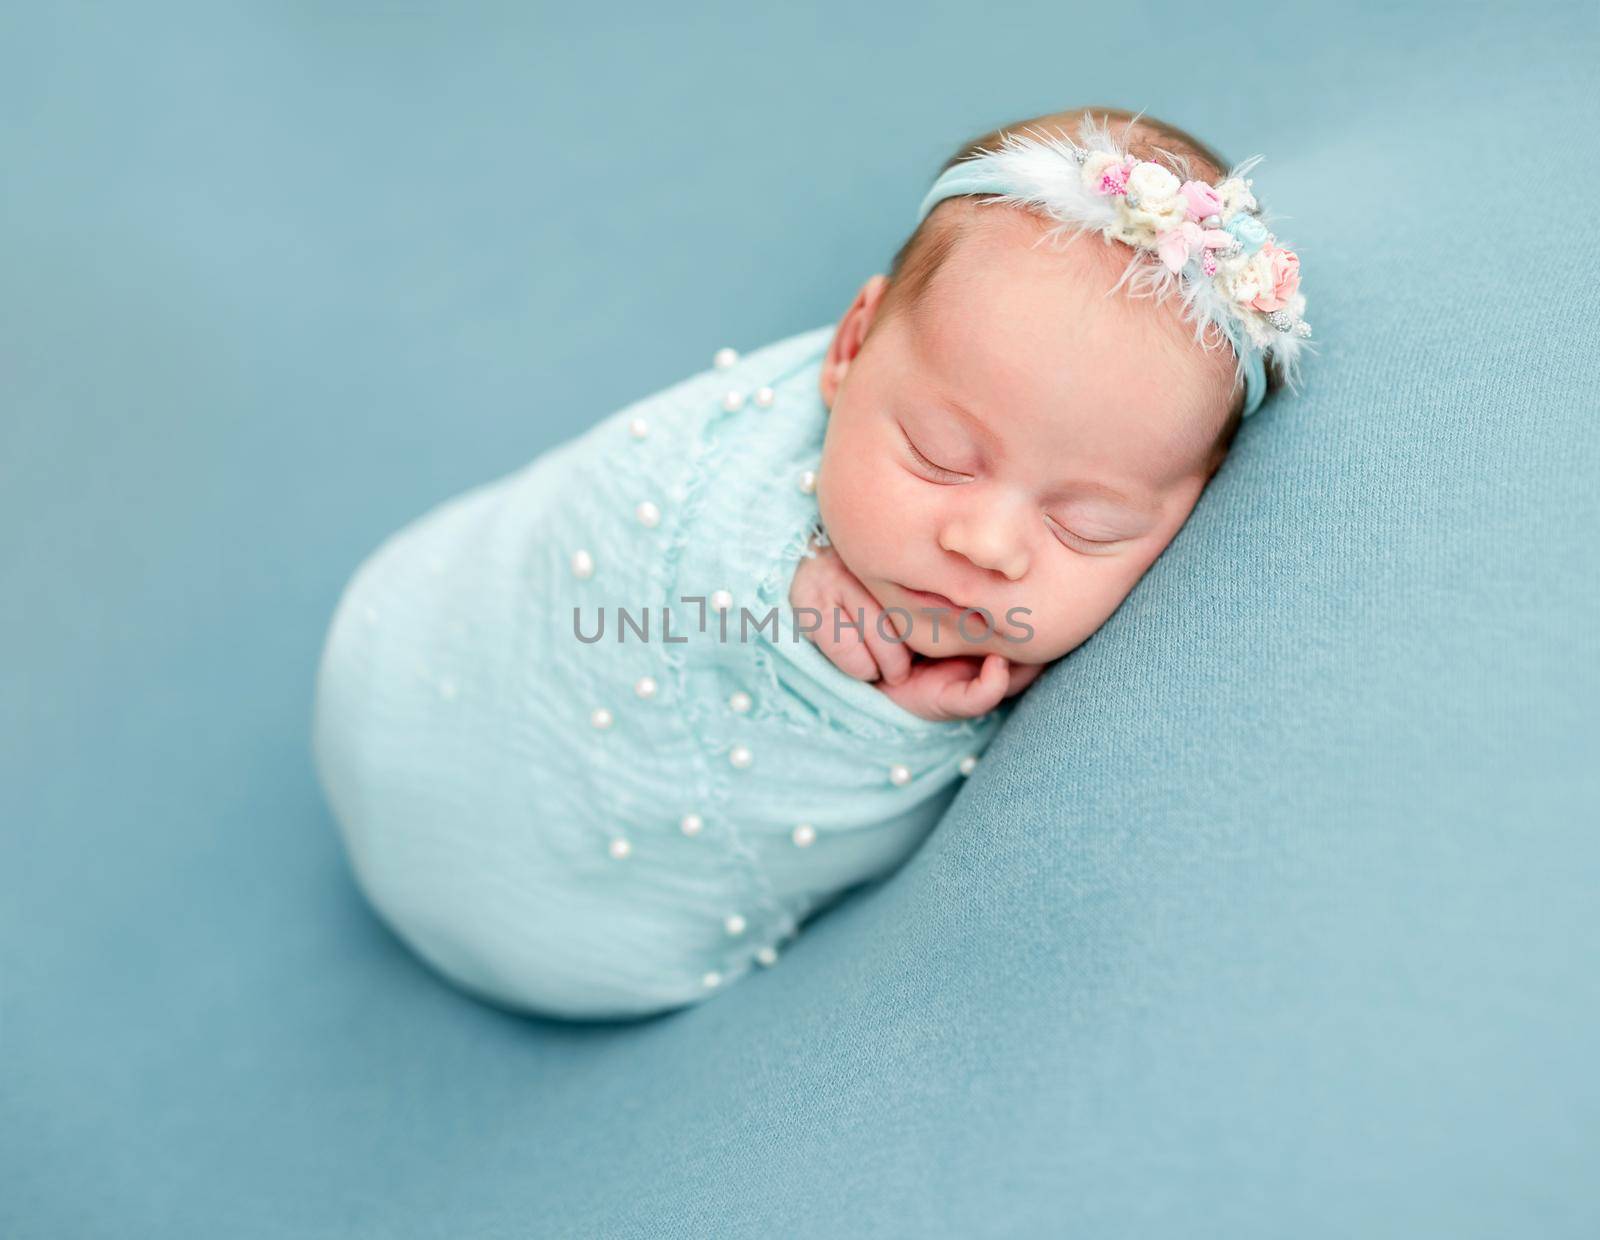 Adorable newborn wrapped in blue blanket